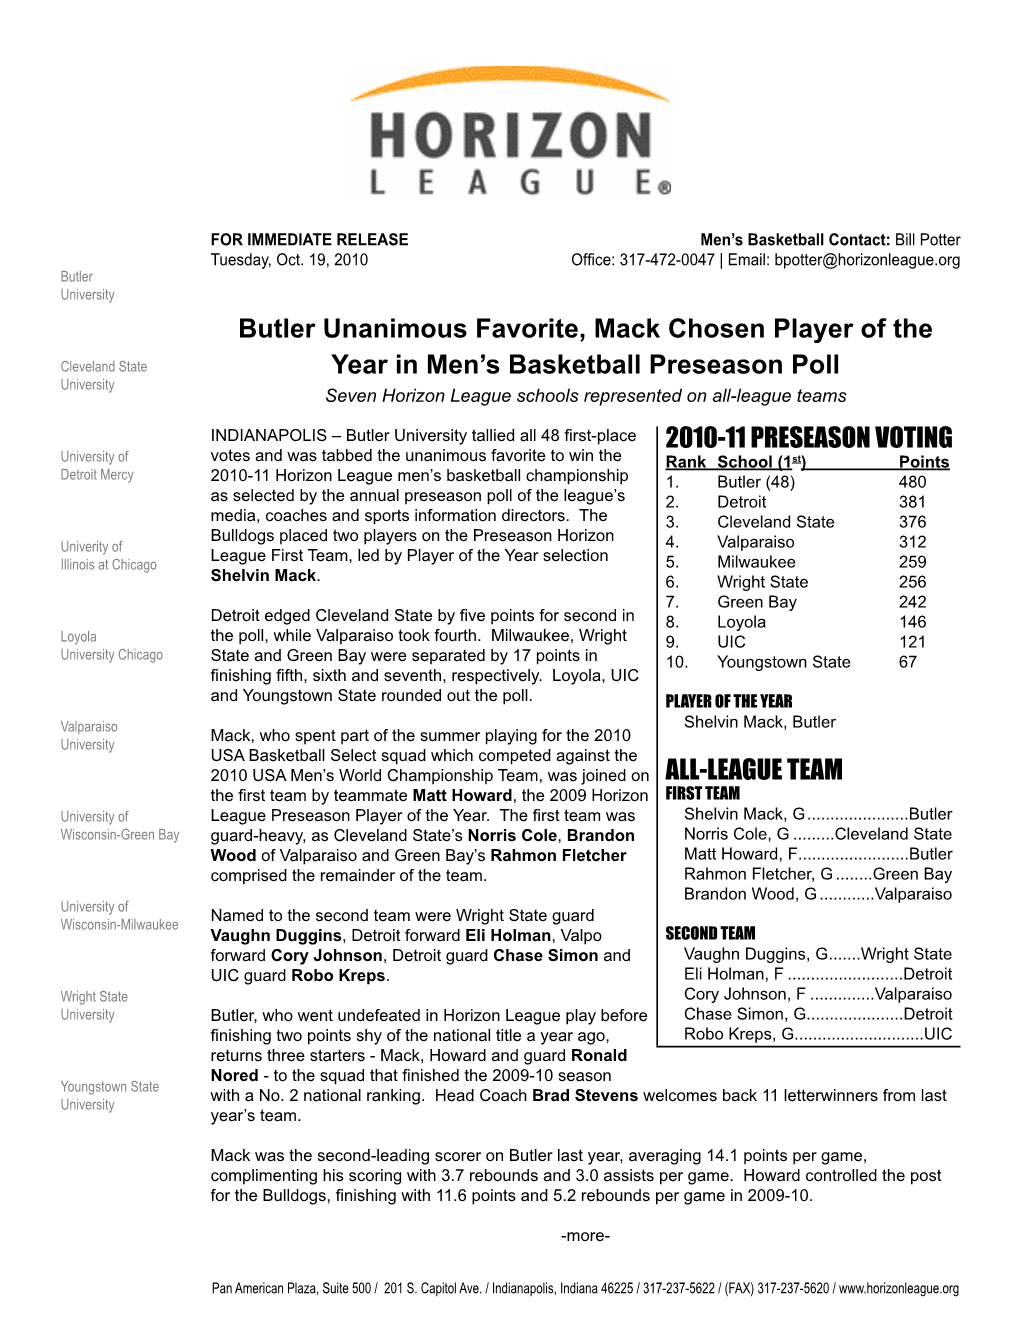 Butler Unanimous Favorite, Mack Chosen Player of the Year in Men's